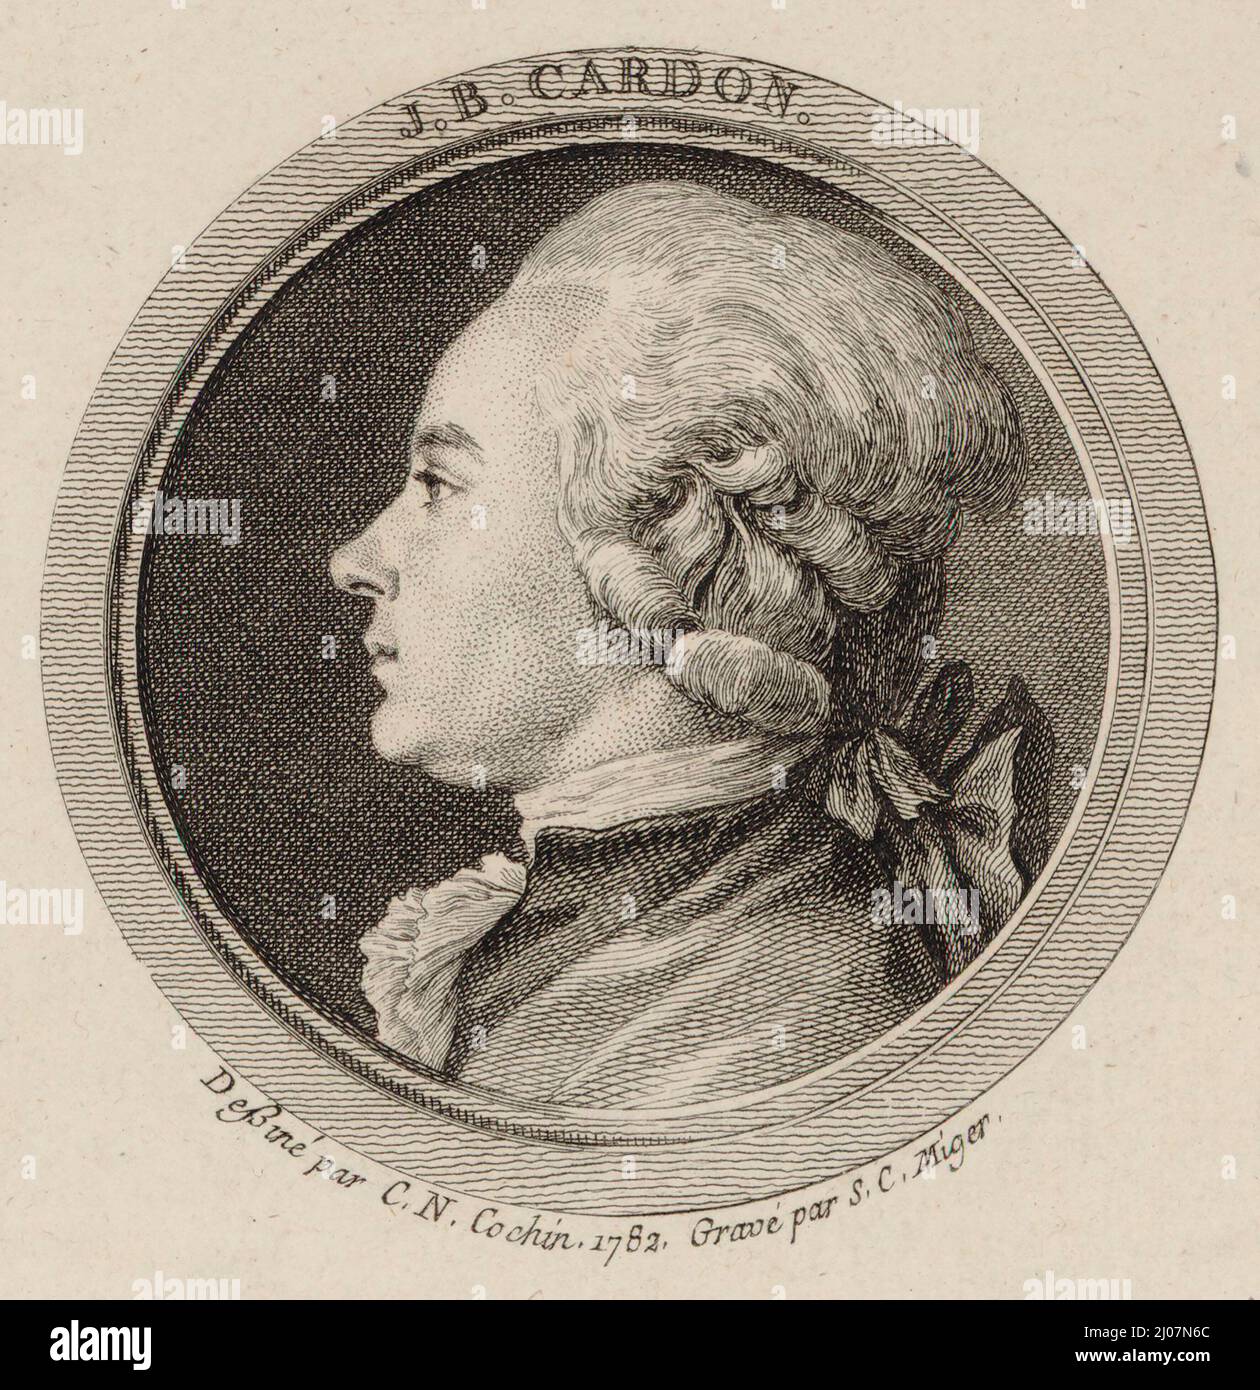 Portrait of the Harpist and composer Jean-Baptiste Cardon (1760-1803). Museum: PRIVATE COLLECTION. Author: Cochin, Charles-Nicolas, the Younger. Stock Photo